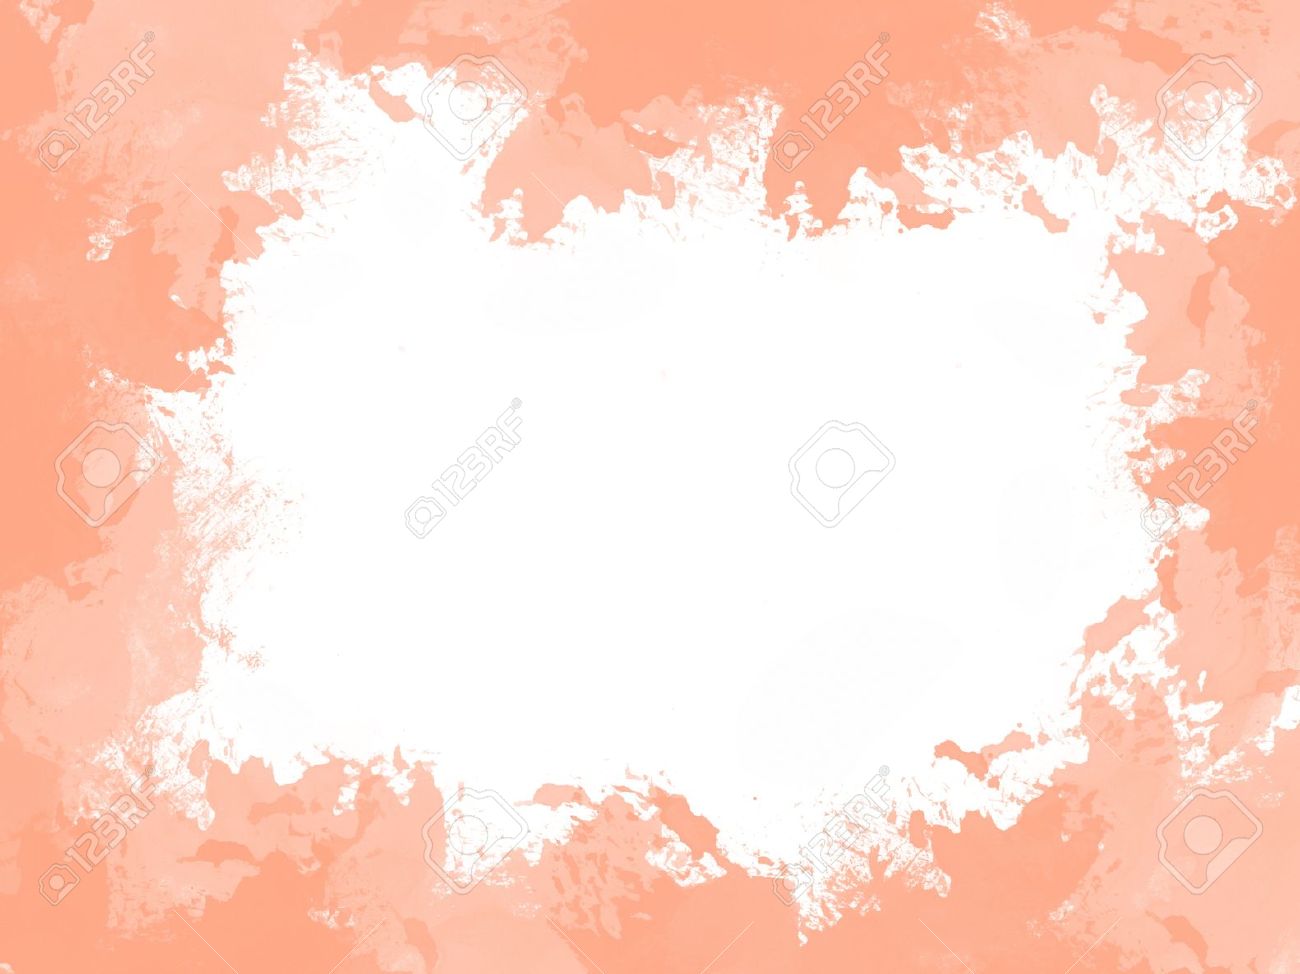 Abstract Water Color Peach Orange Frame Background Stock Photo 1300x974